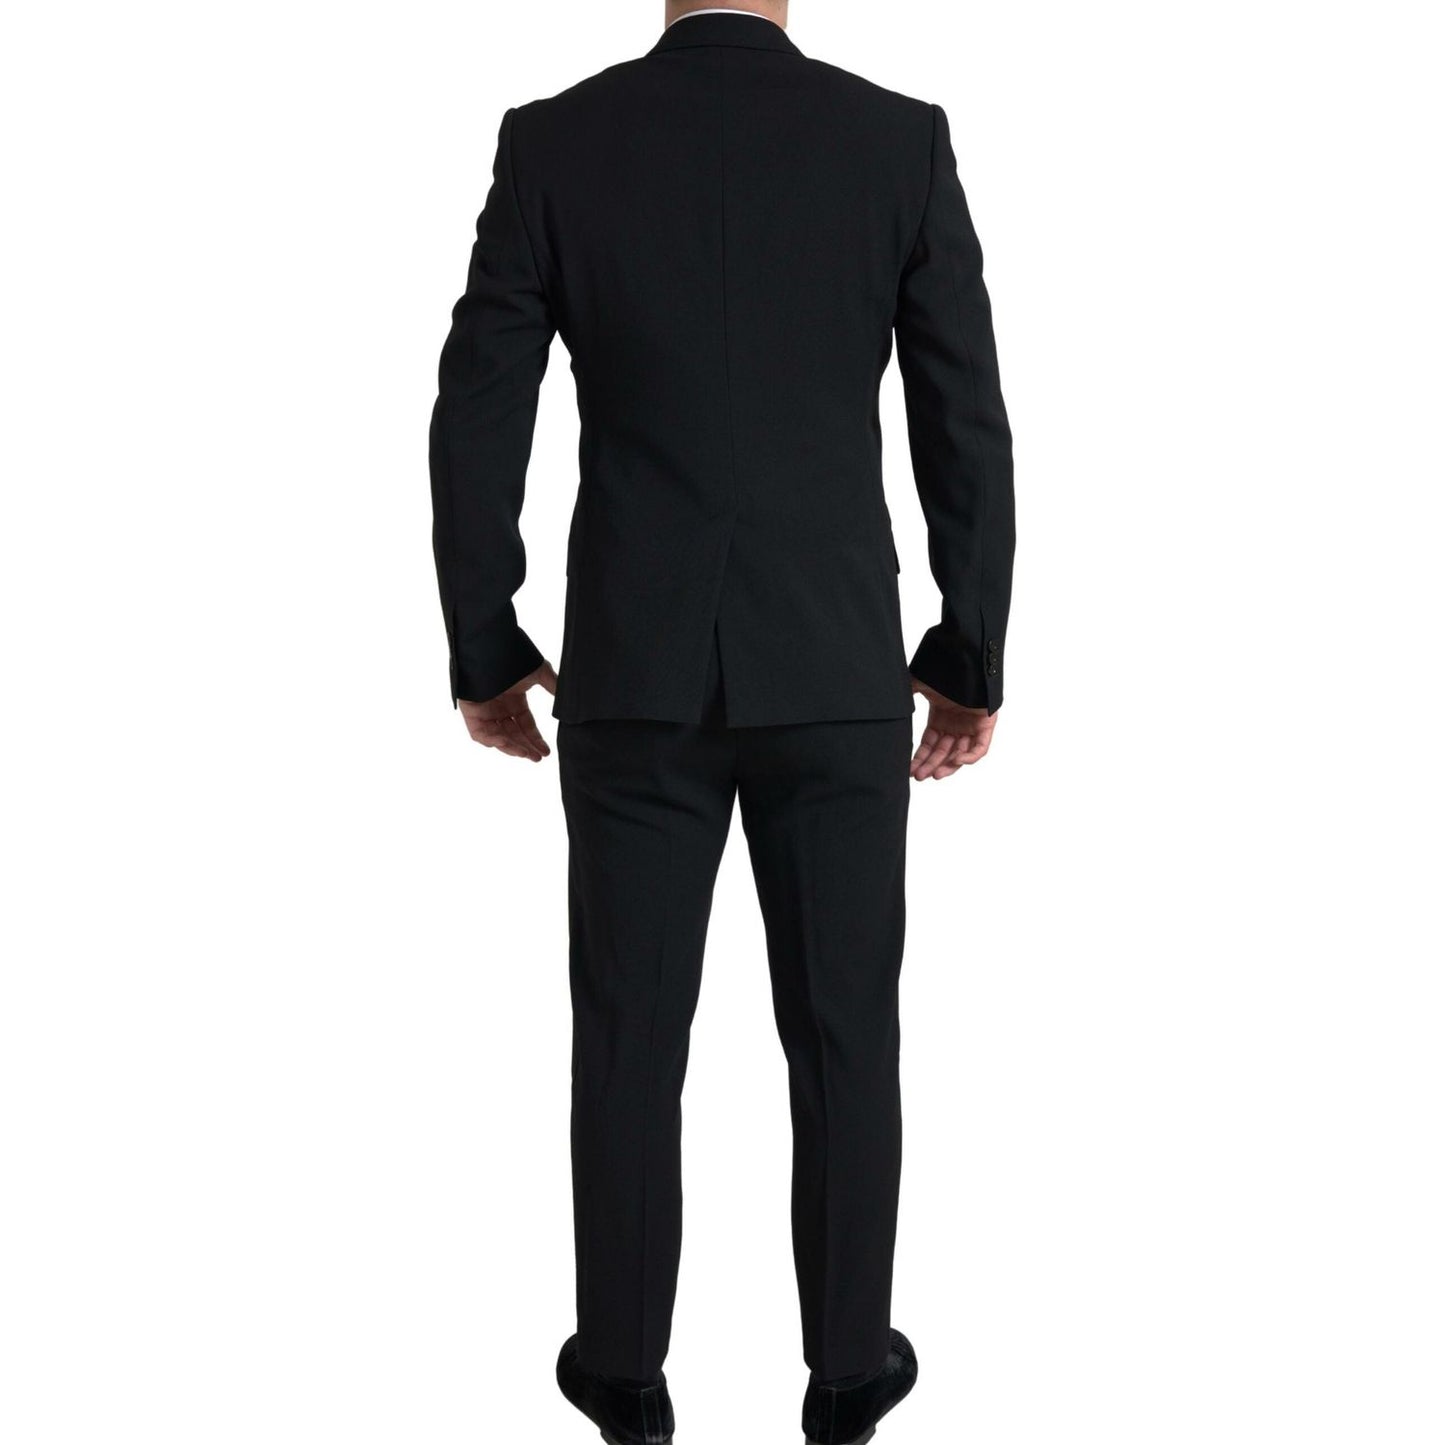 Dolce & Gabbana Elegant Slim Fit Double Breasted Suit black-2-piece-double-breasted-sicilia-suit